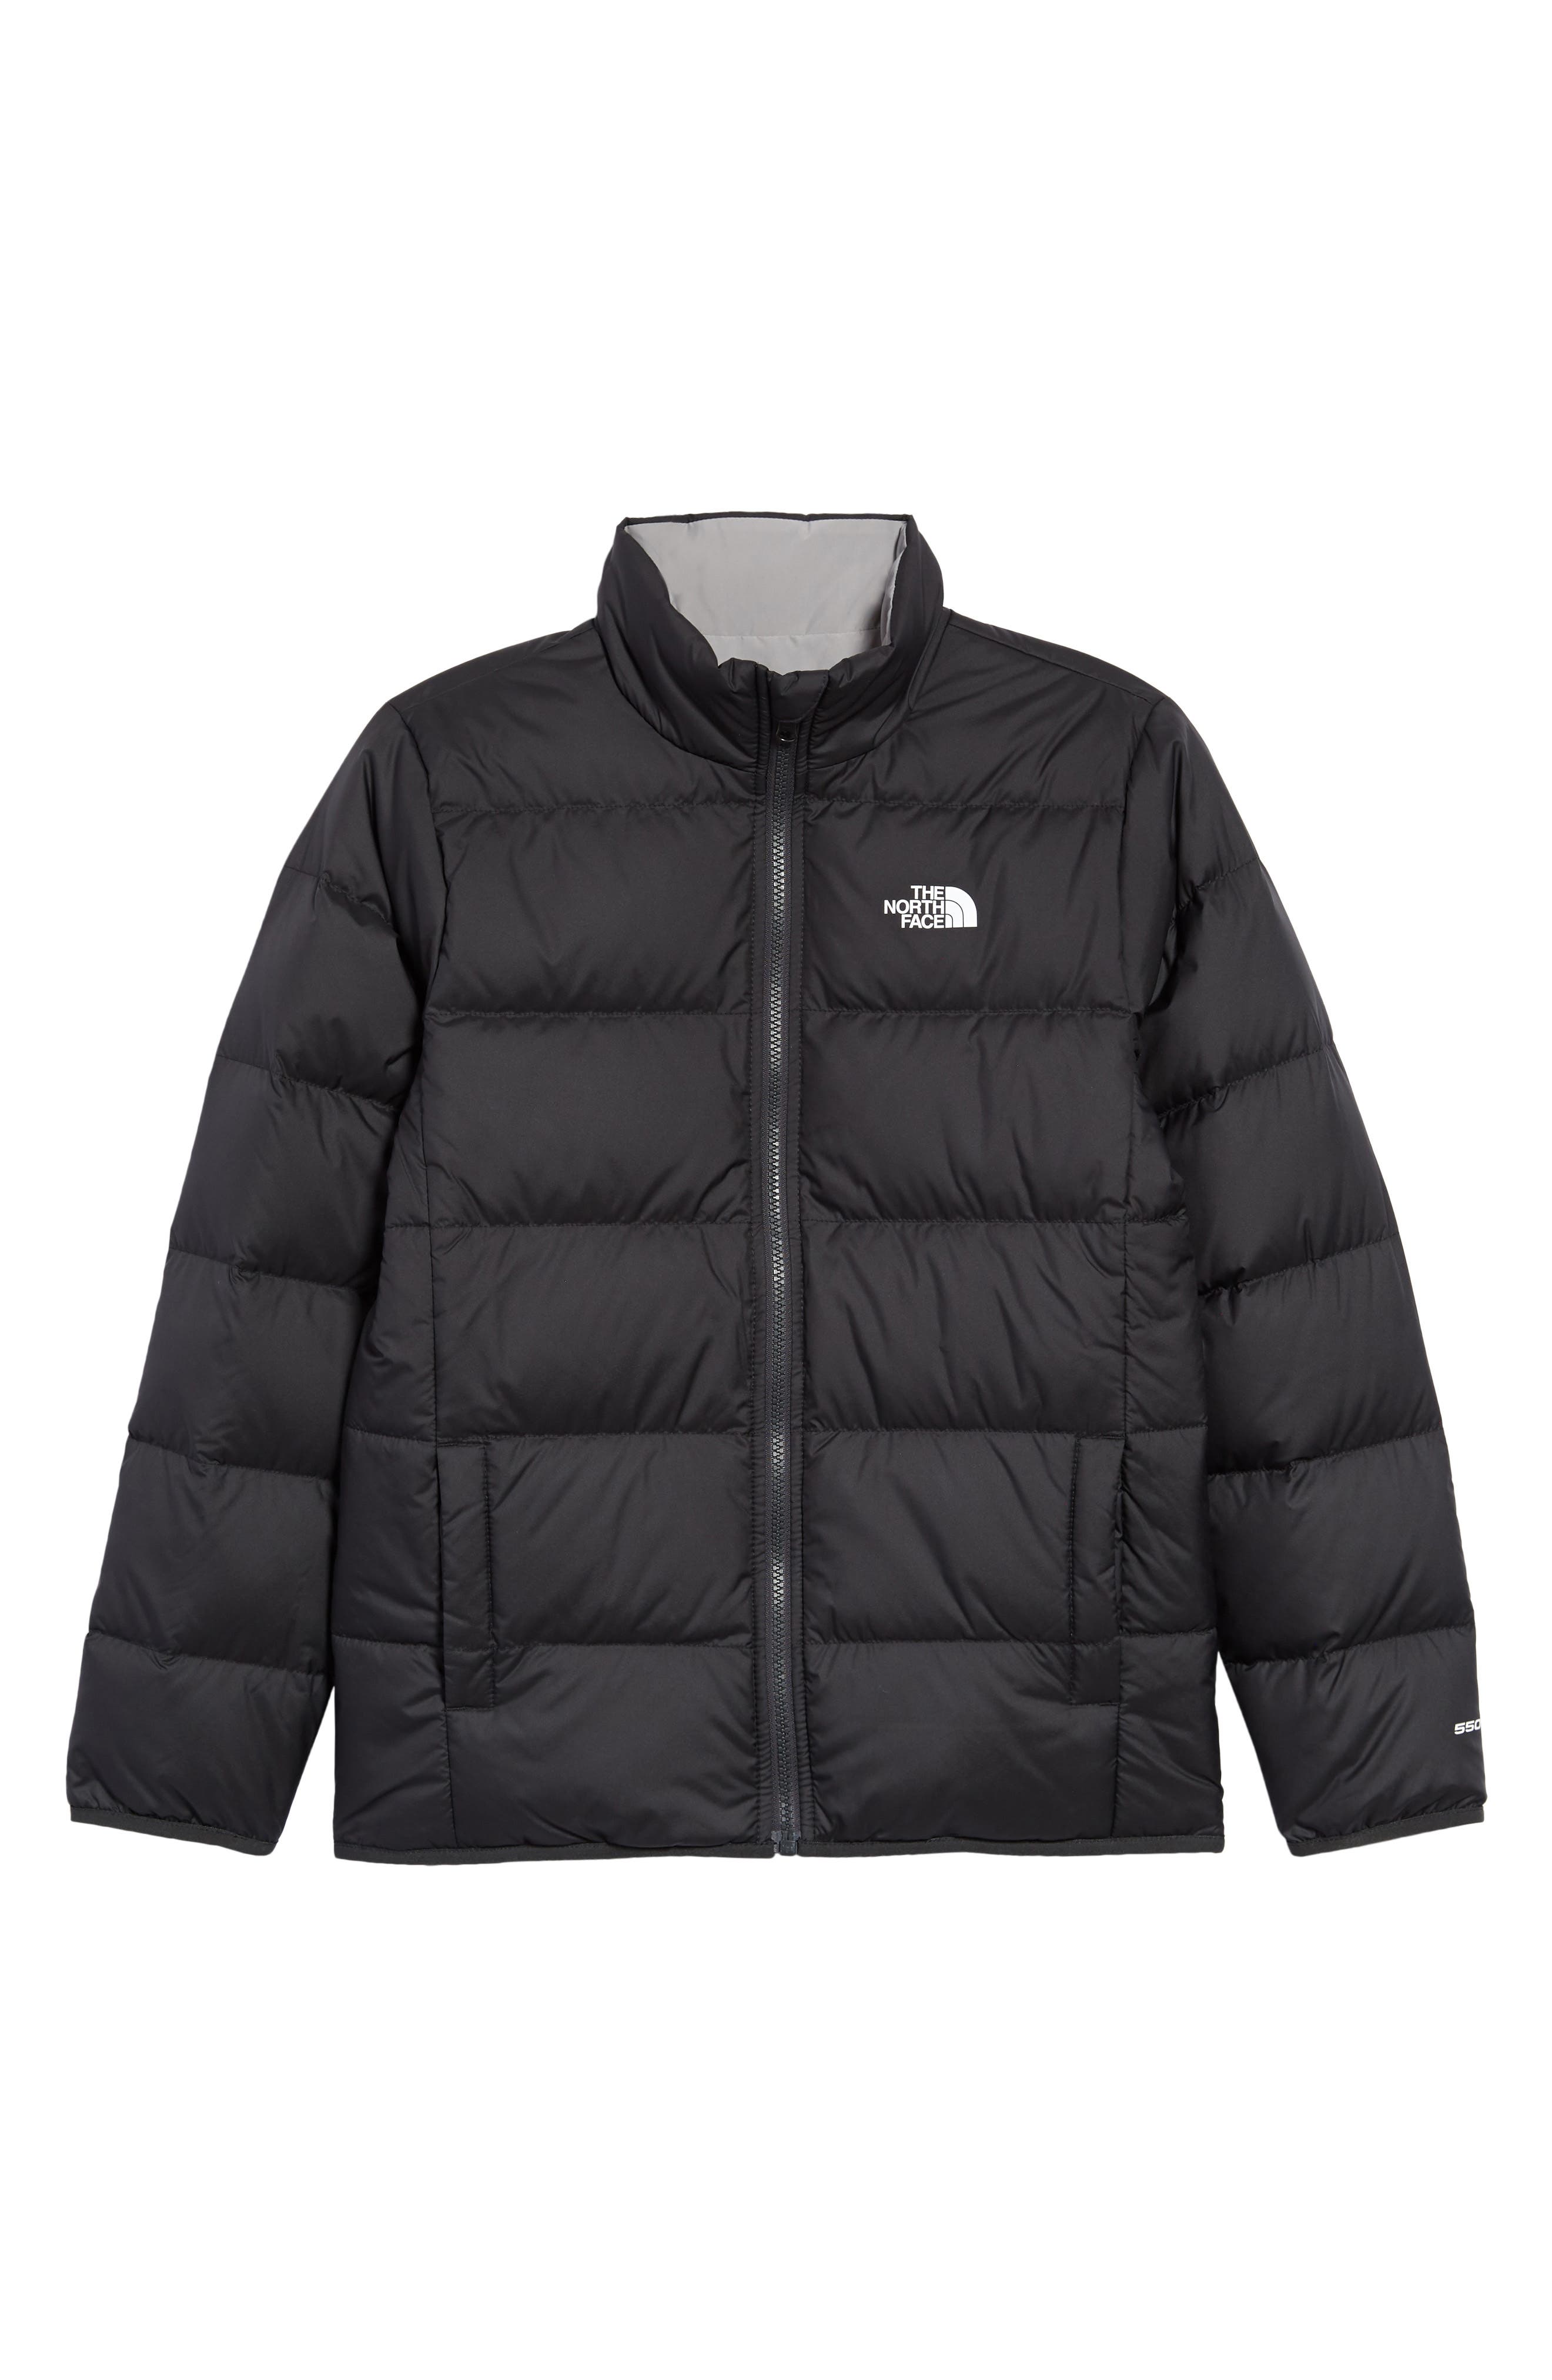 north face kids sizes